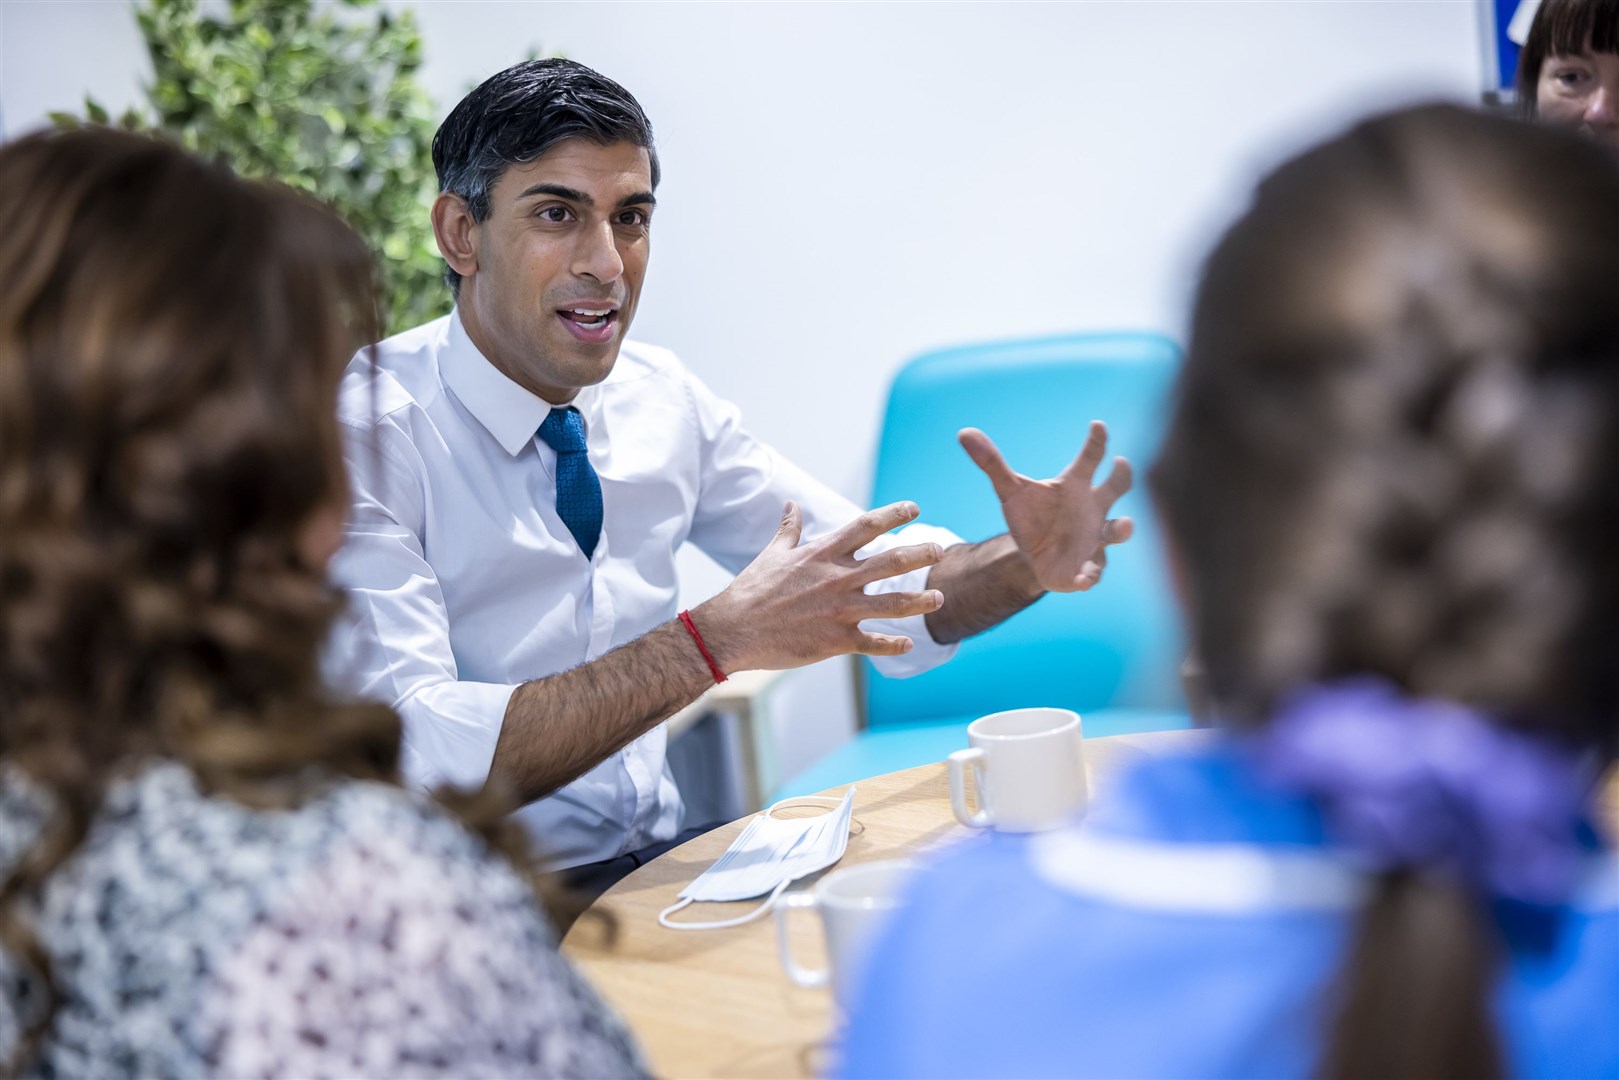 Prime Minister Rishi Sunak during a visit to Oldham Community Diagnostic Centre in Oldham (James Glossop/The Times/PA)